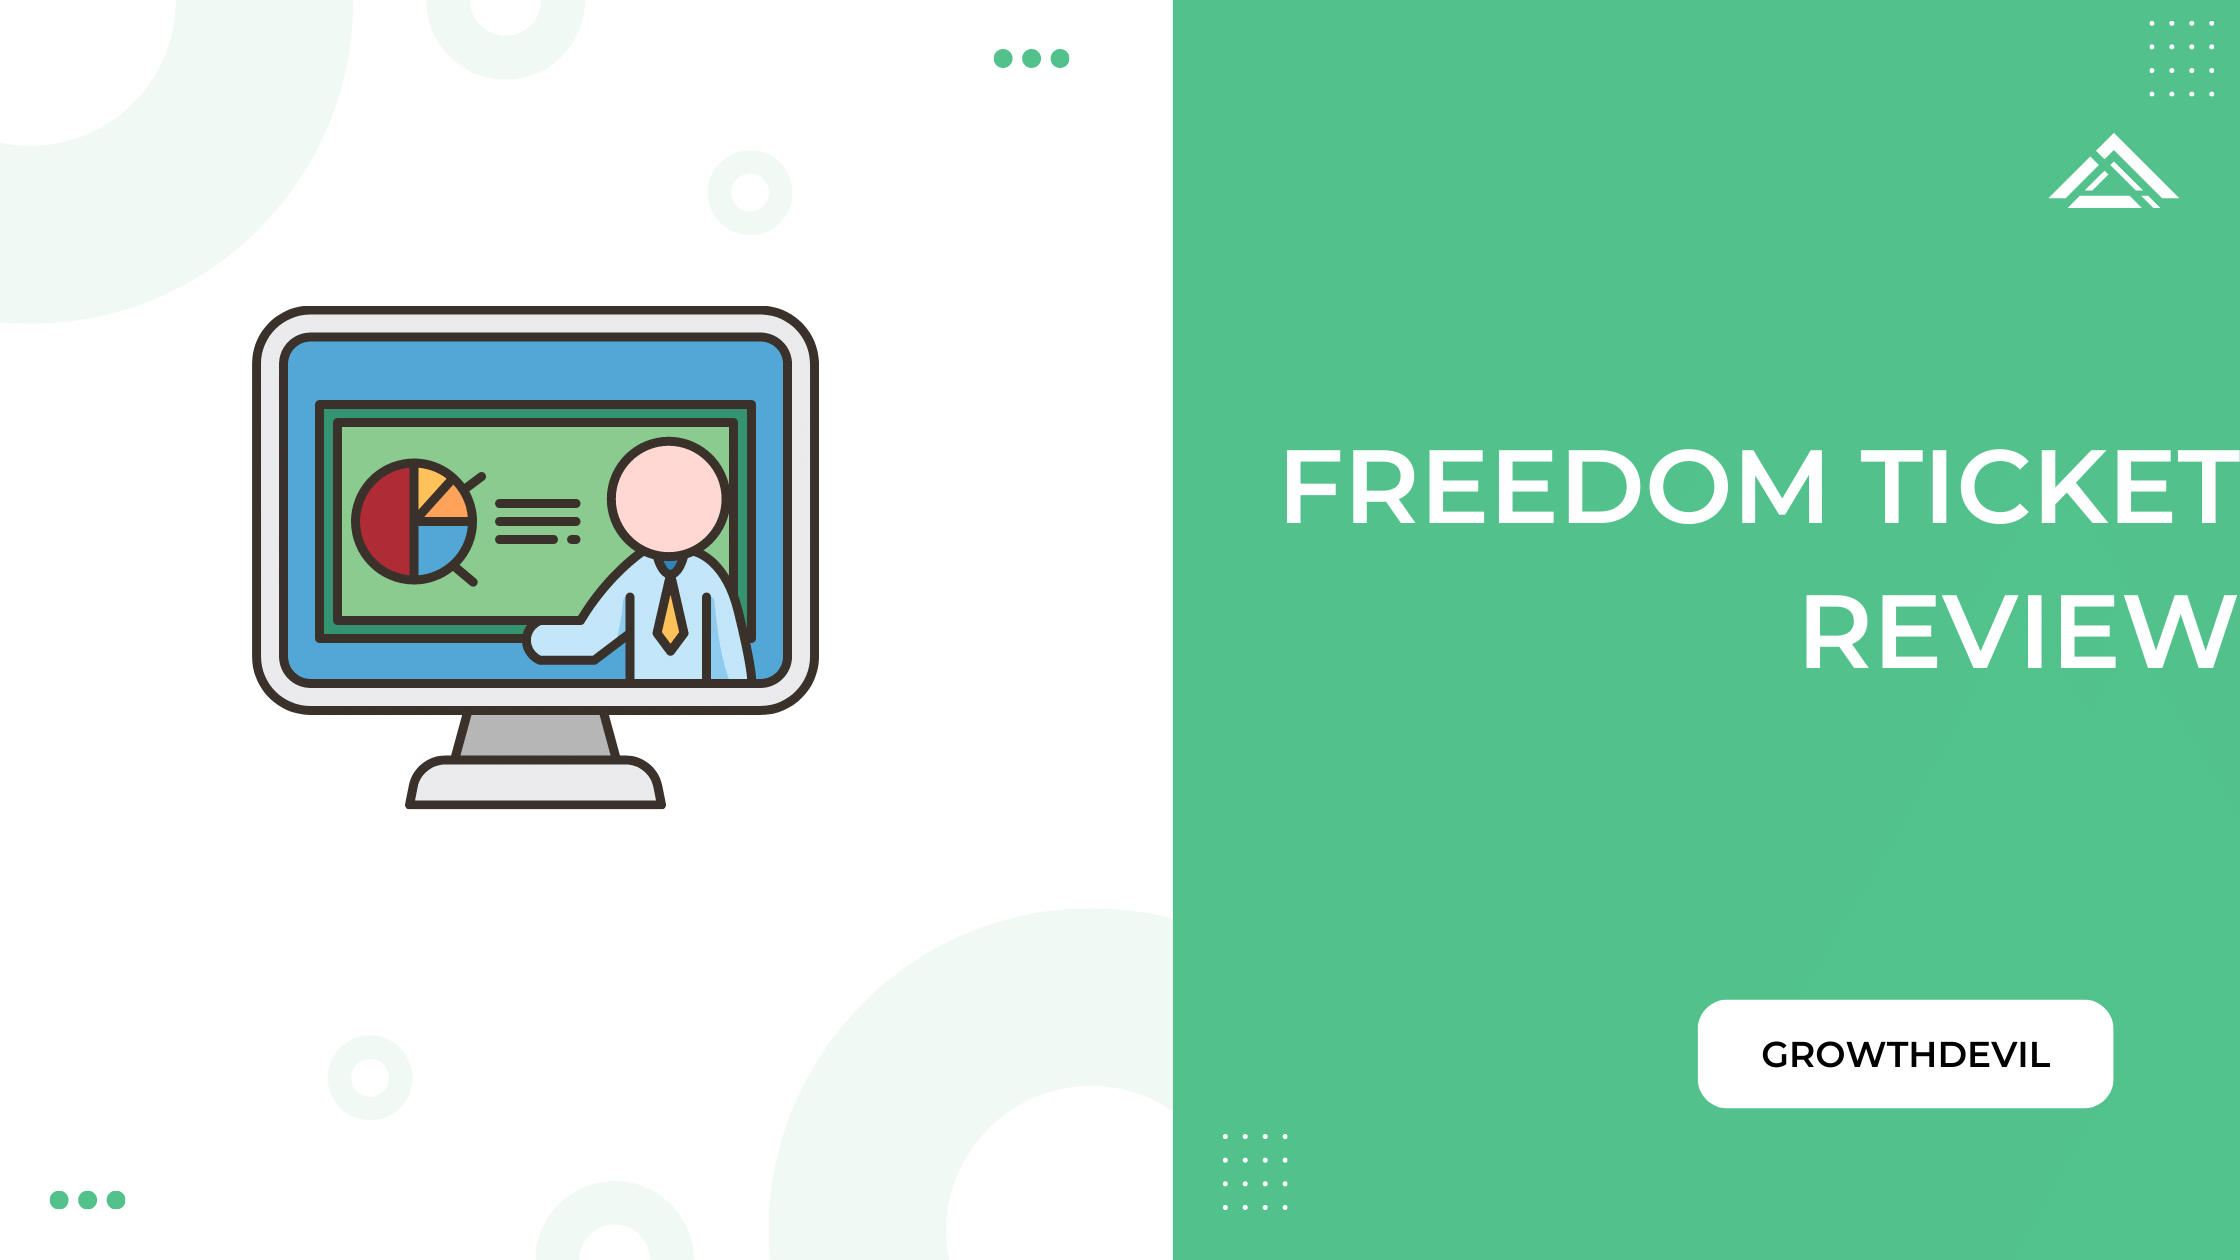 Freedom Ticket Review - GrowthDevil